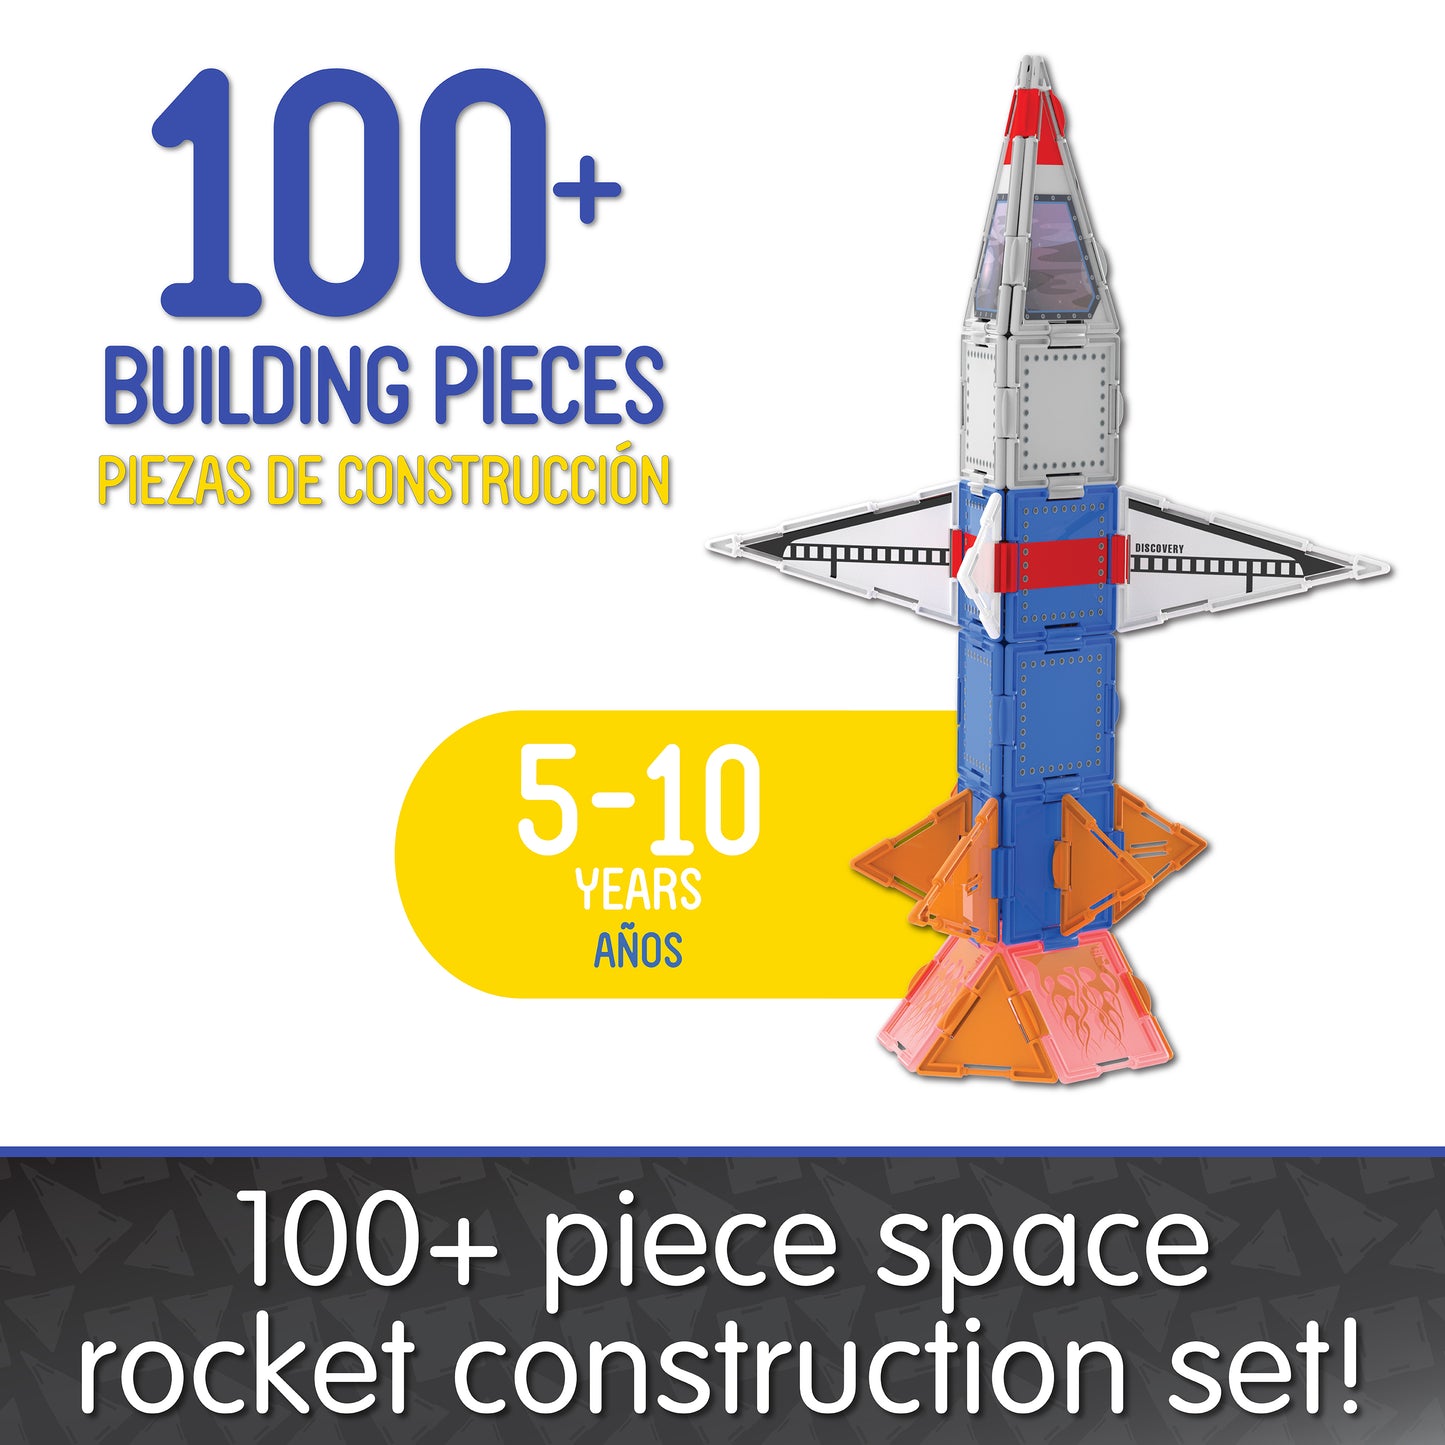 Infographic about Space Rocket